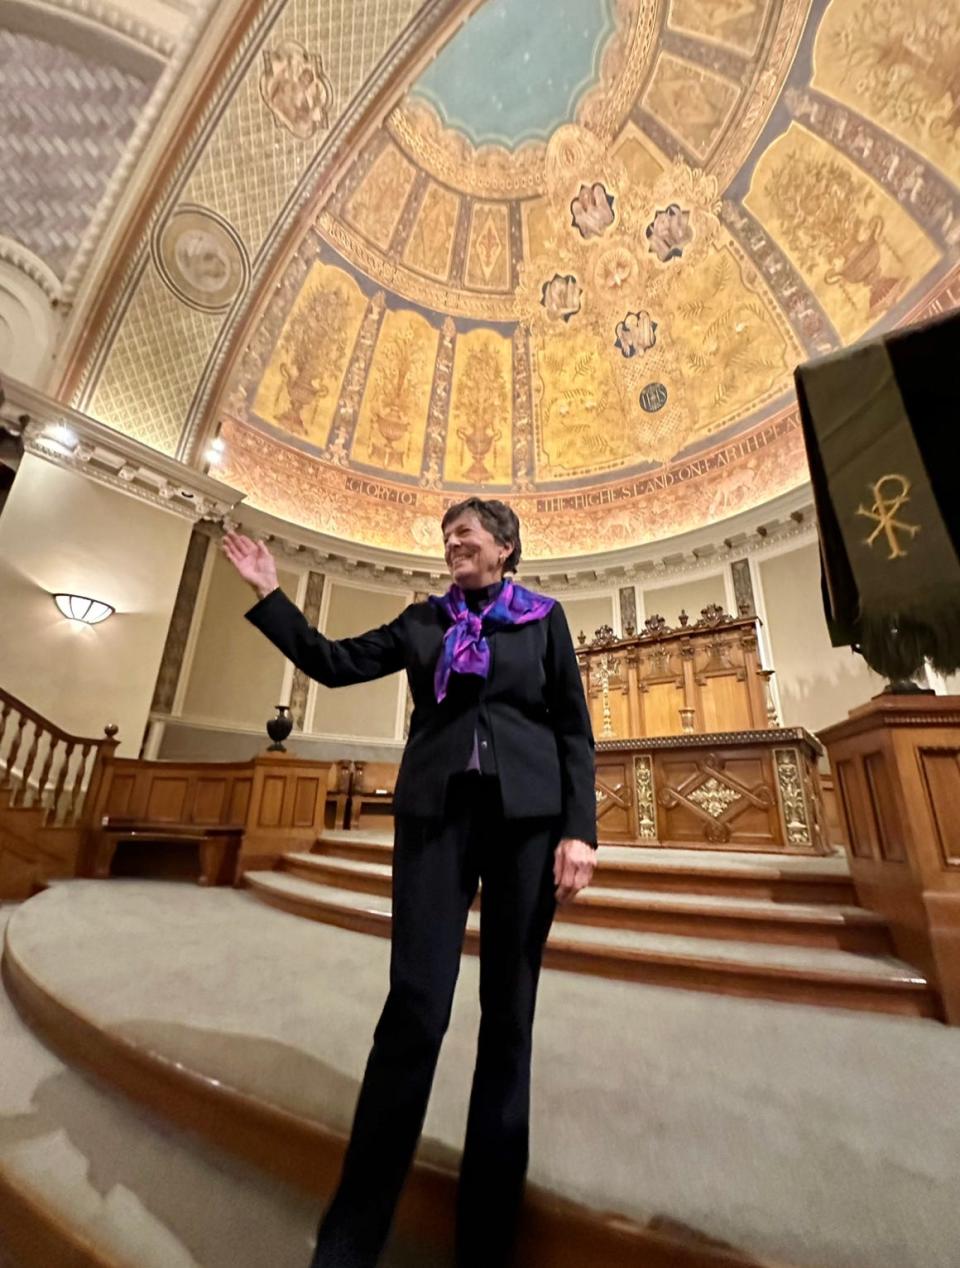 The Rev. Rebecca Spencer in the sanctuary of Providence's Central Congregational Church.